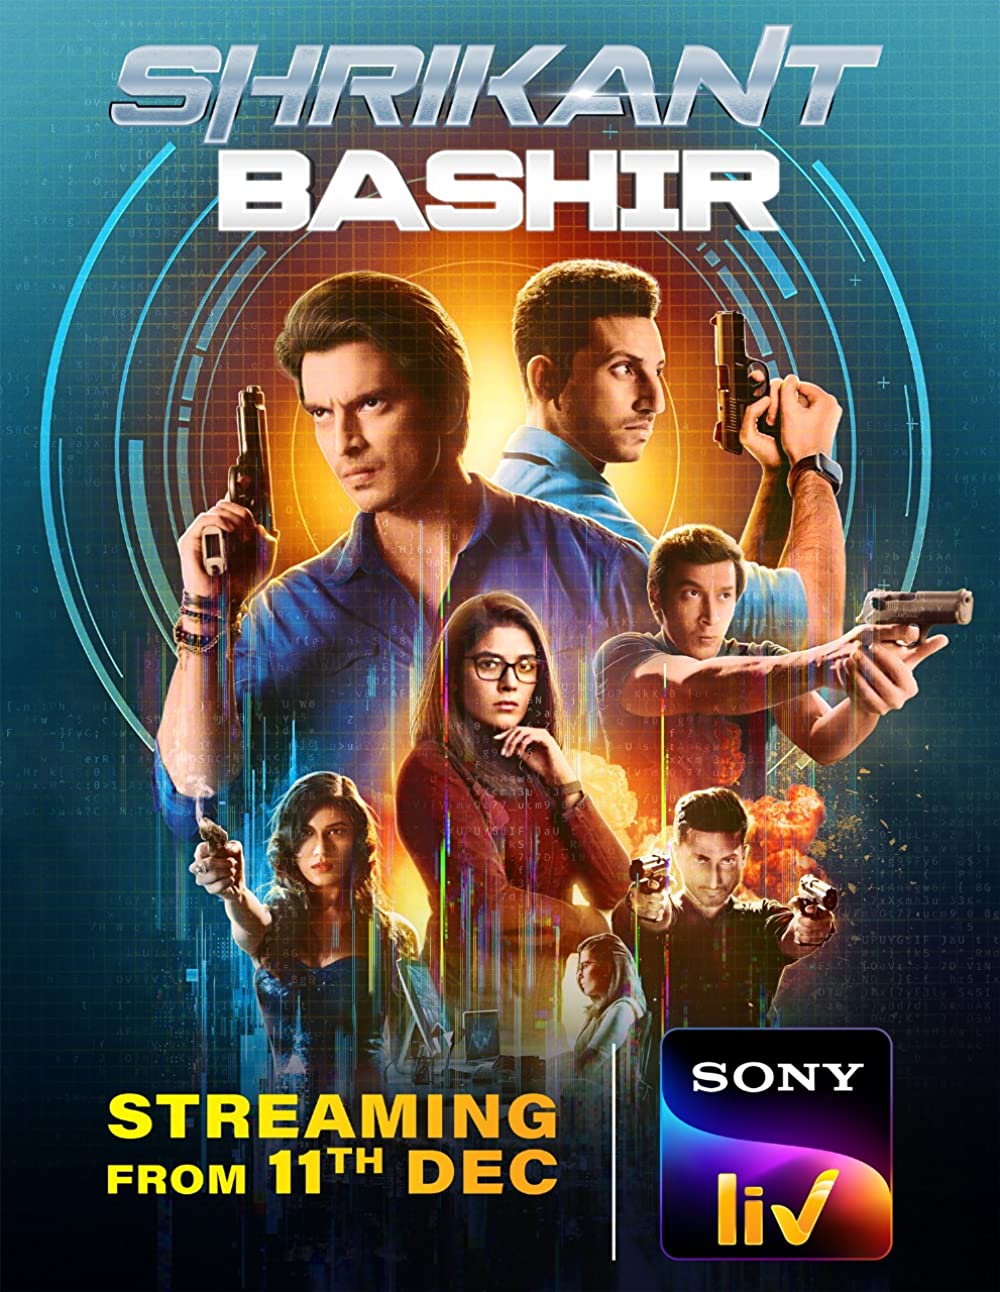 You are currently viewing Shrikant Bashir 2020 Hindi S01 Complete Web Series ESubs 480p HDRip 600MB Download & Watch Online